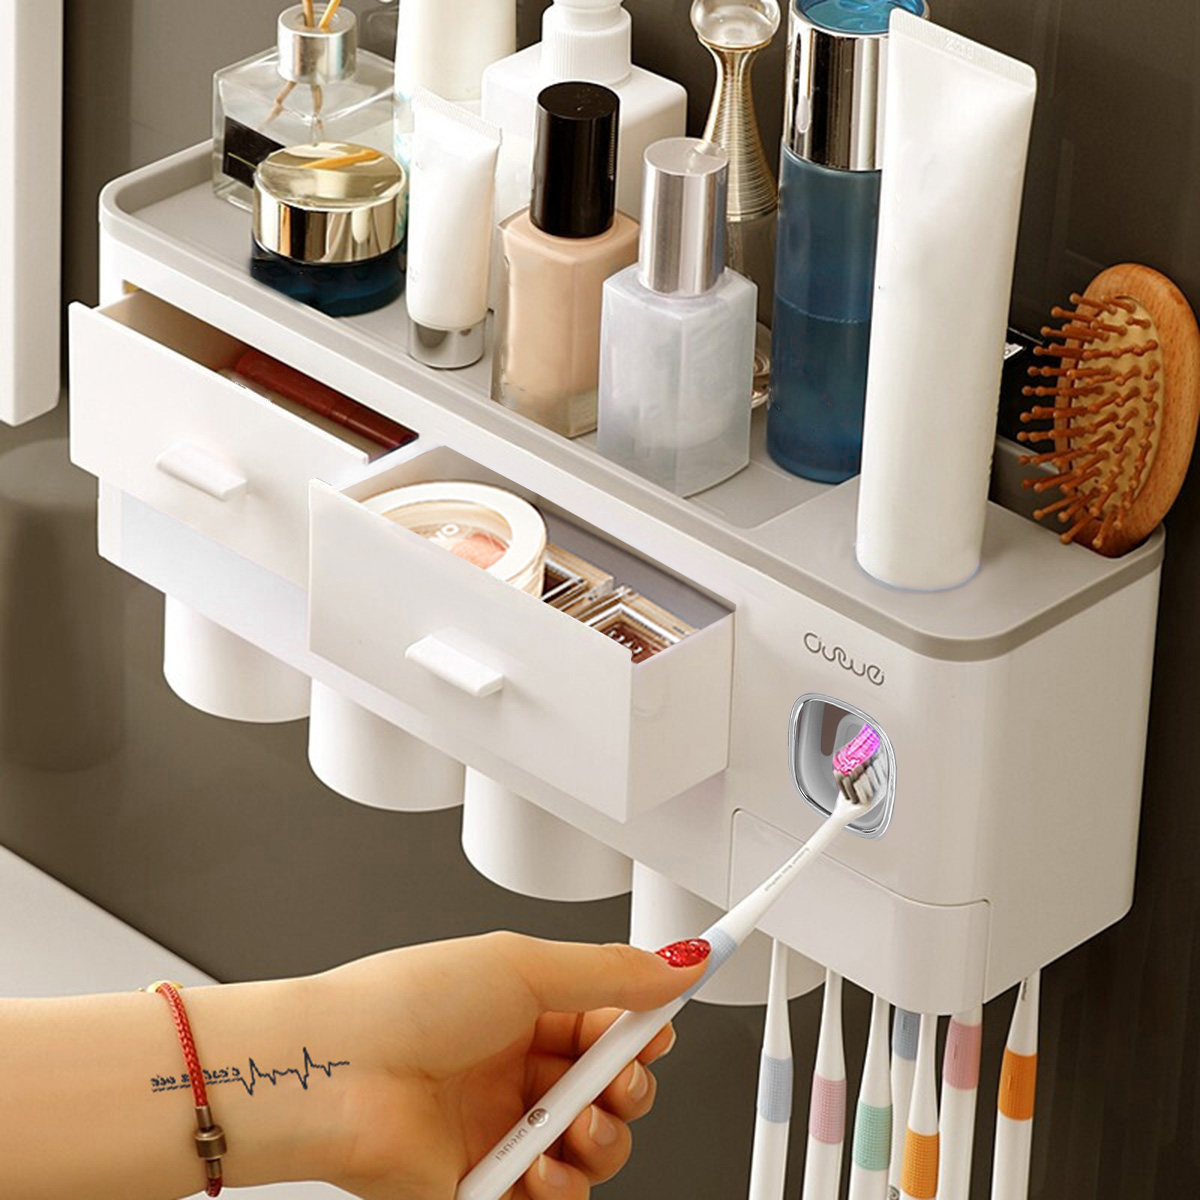 Toothbrush-Holder-Automatic-Toothpaste-Dispenser-With-Cup-Wall-Mount-Toiletries-Storage-Rack-Bathroo-1755230-9